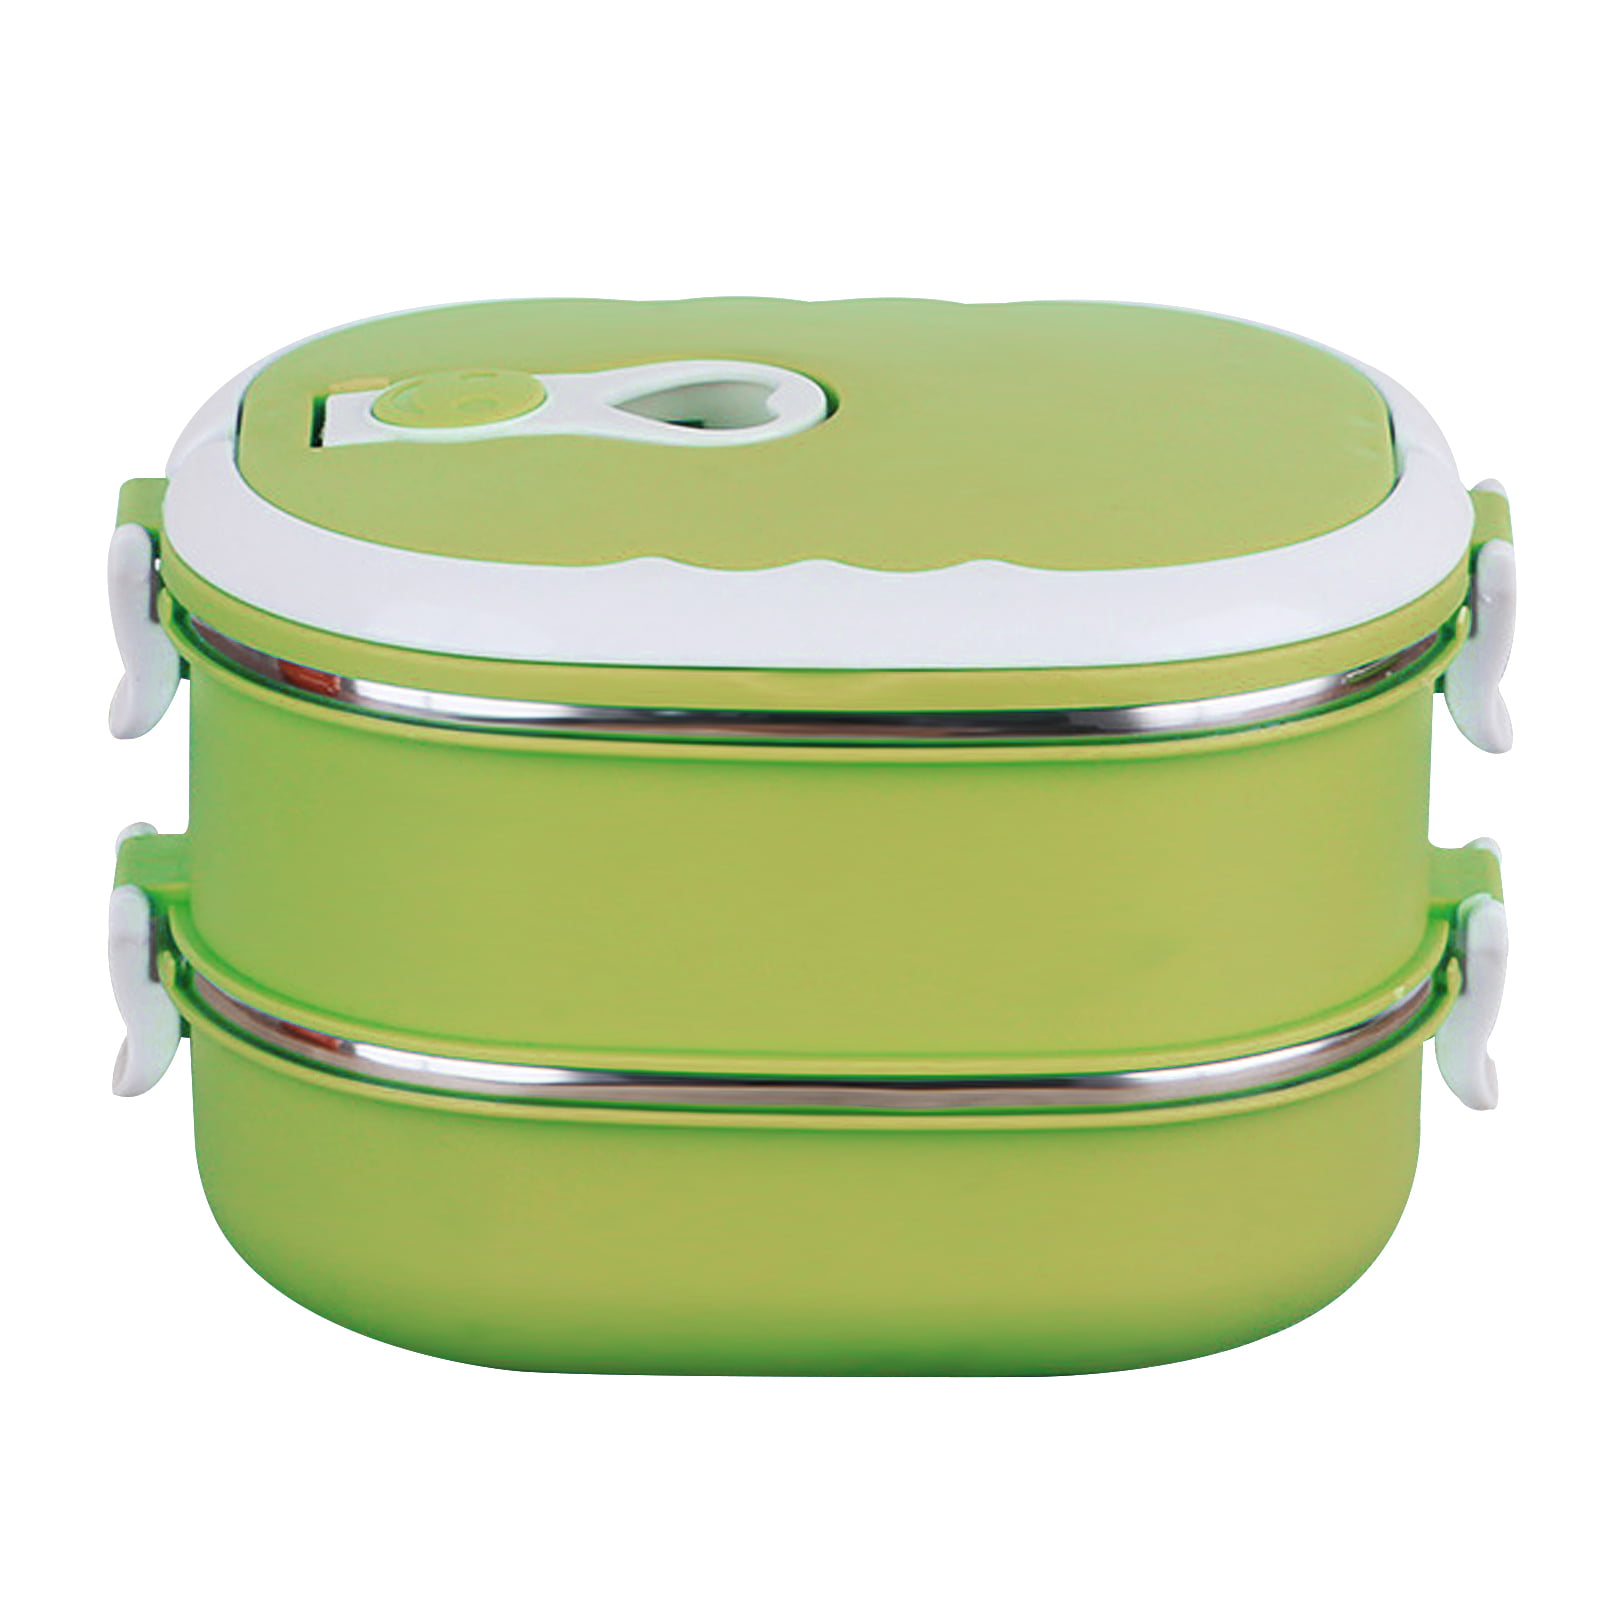 Details about   Eco One All Boxed Up Bento Lunch Box Food Storage Container Eco Friendly Orange